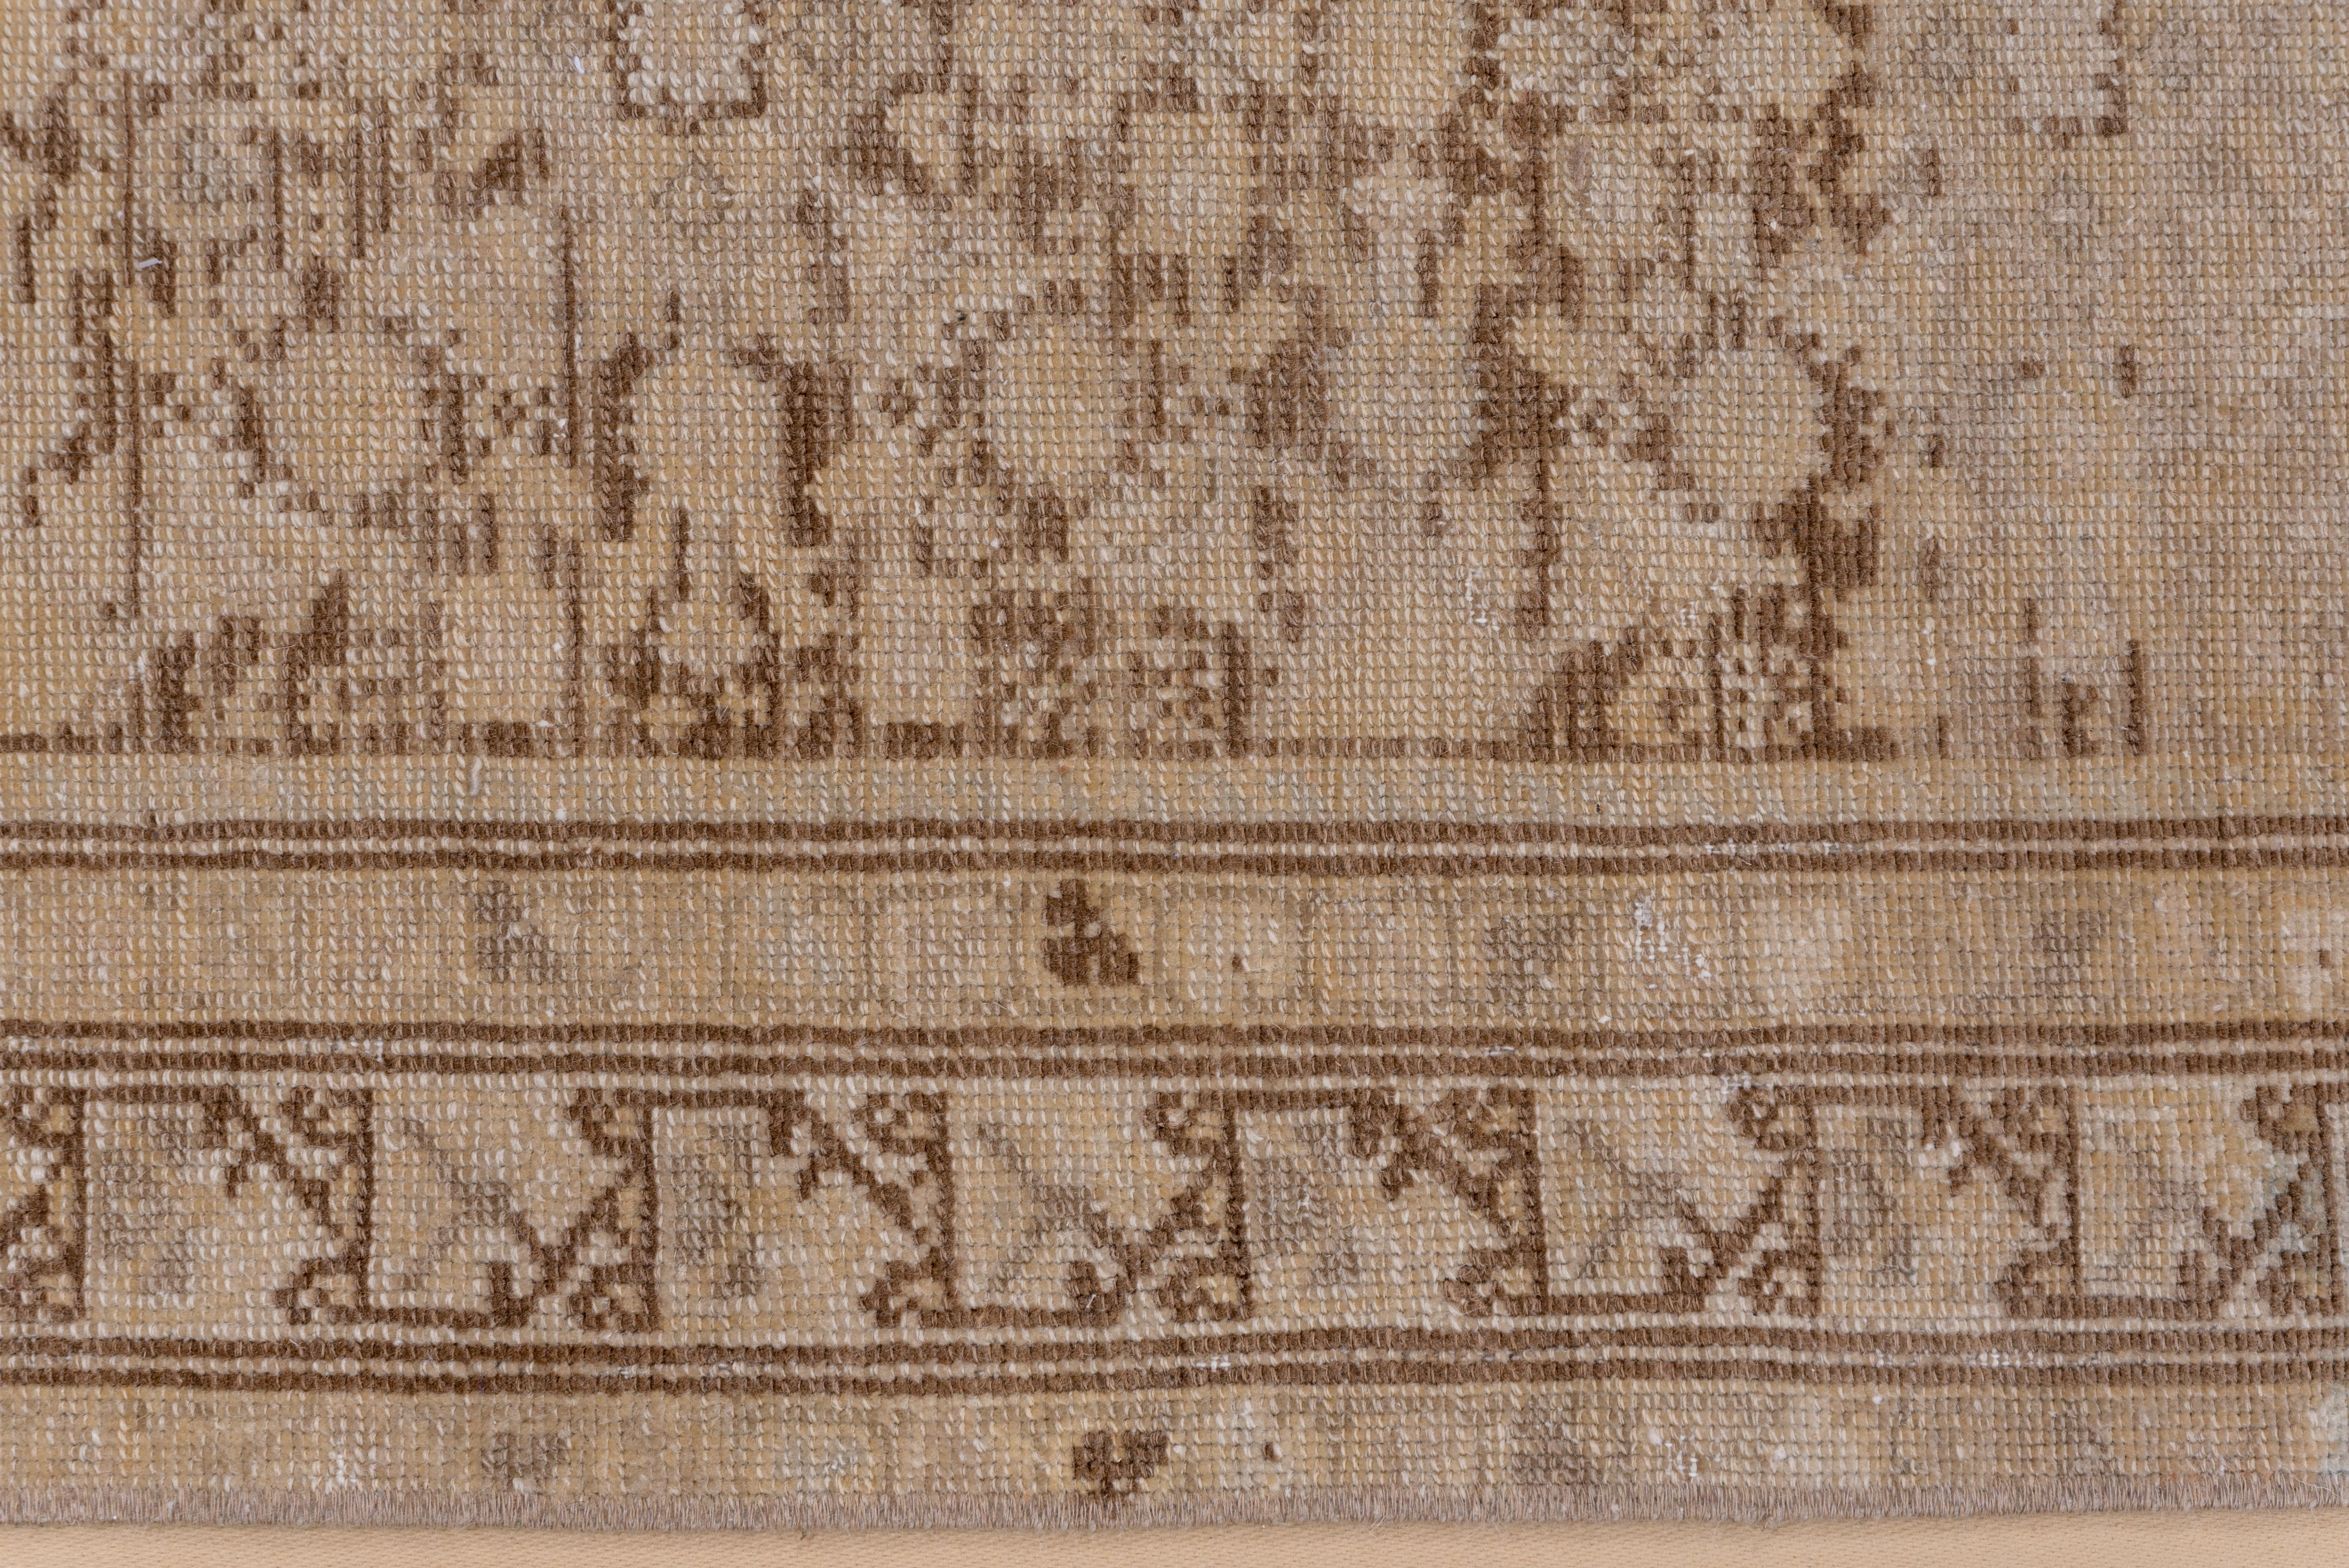 Wool Tone on Tone Antique Malayer Runner